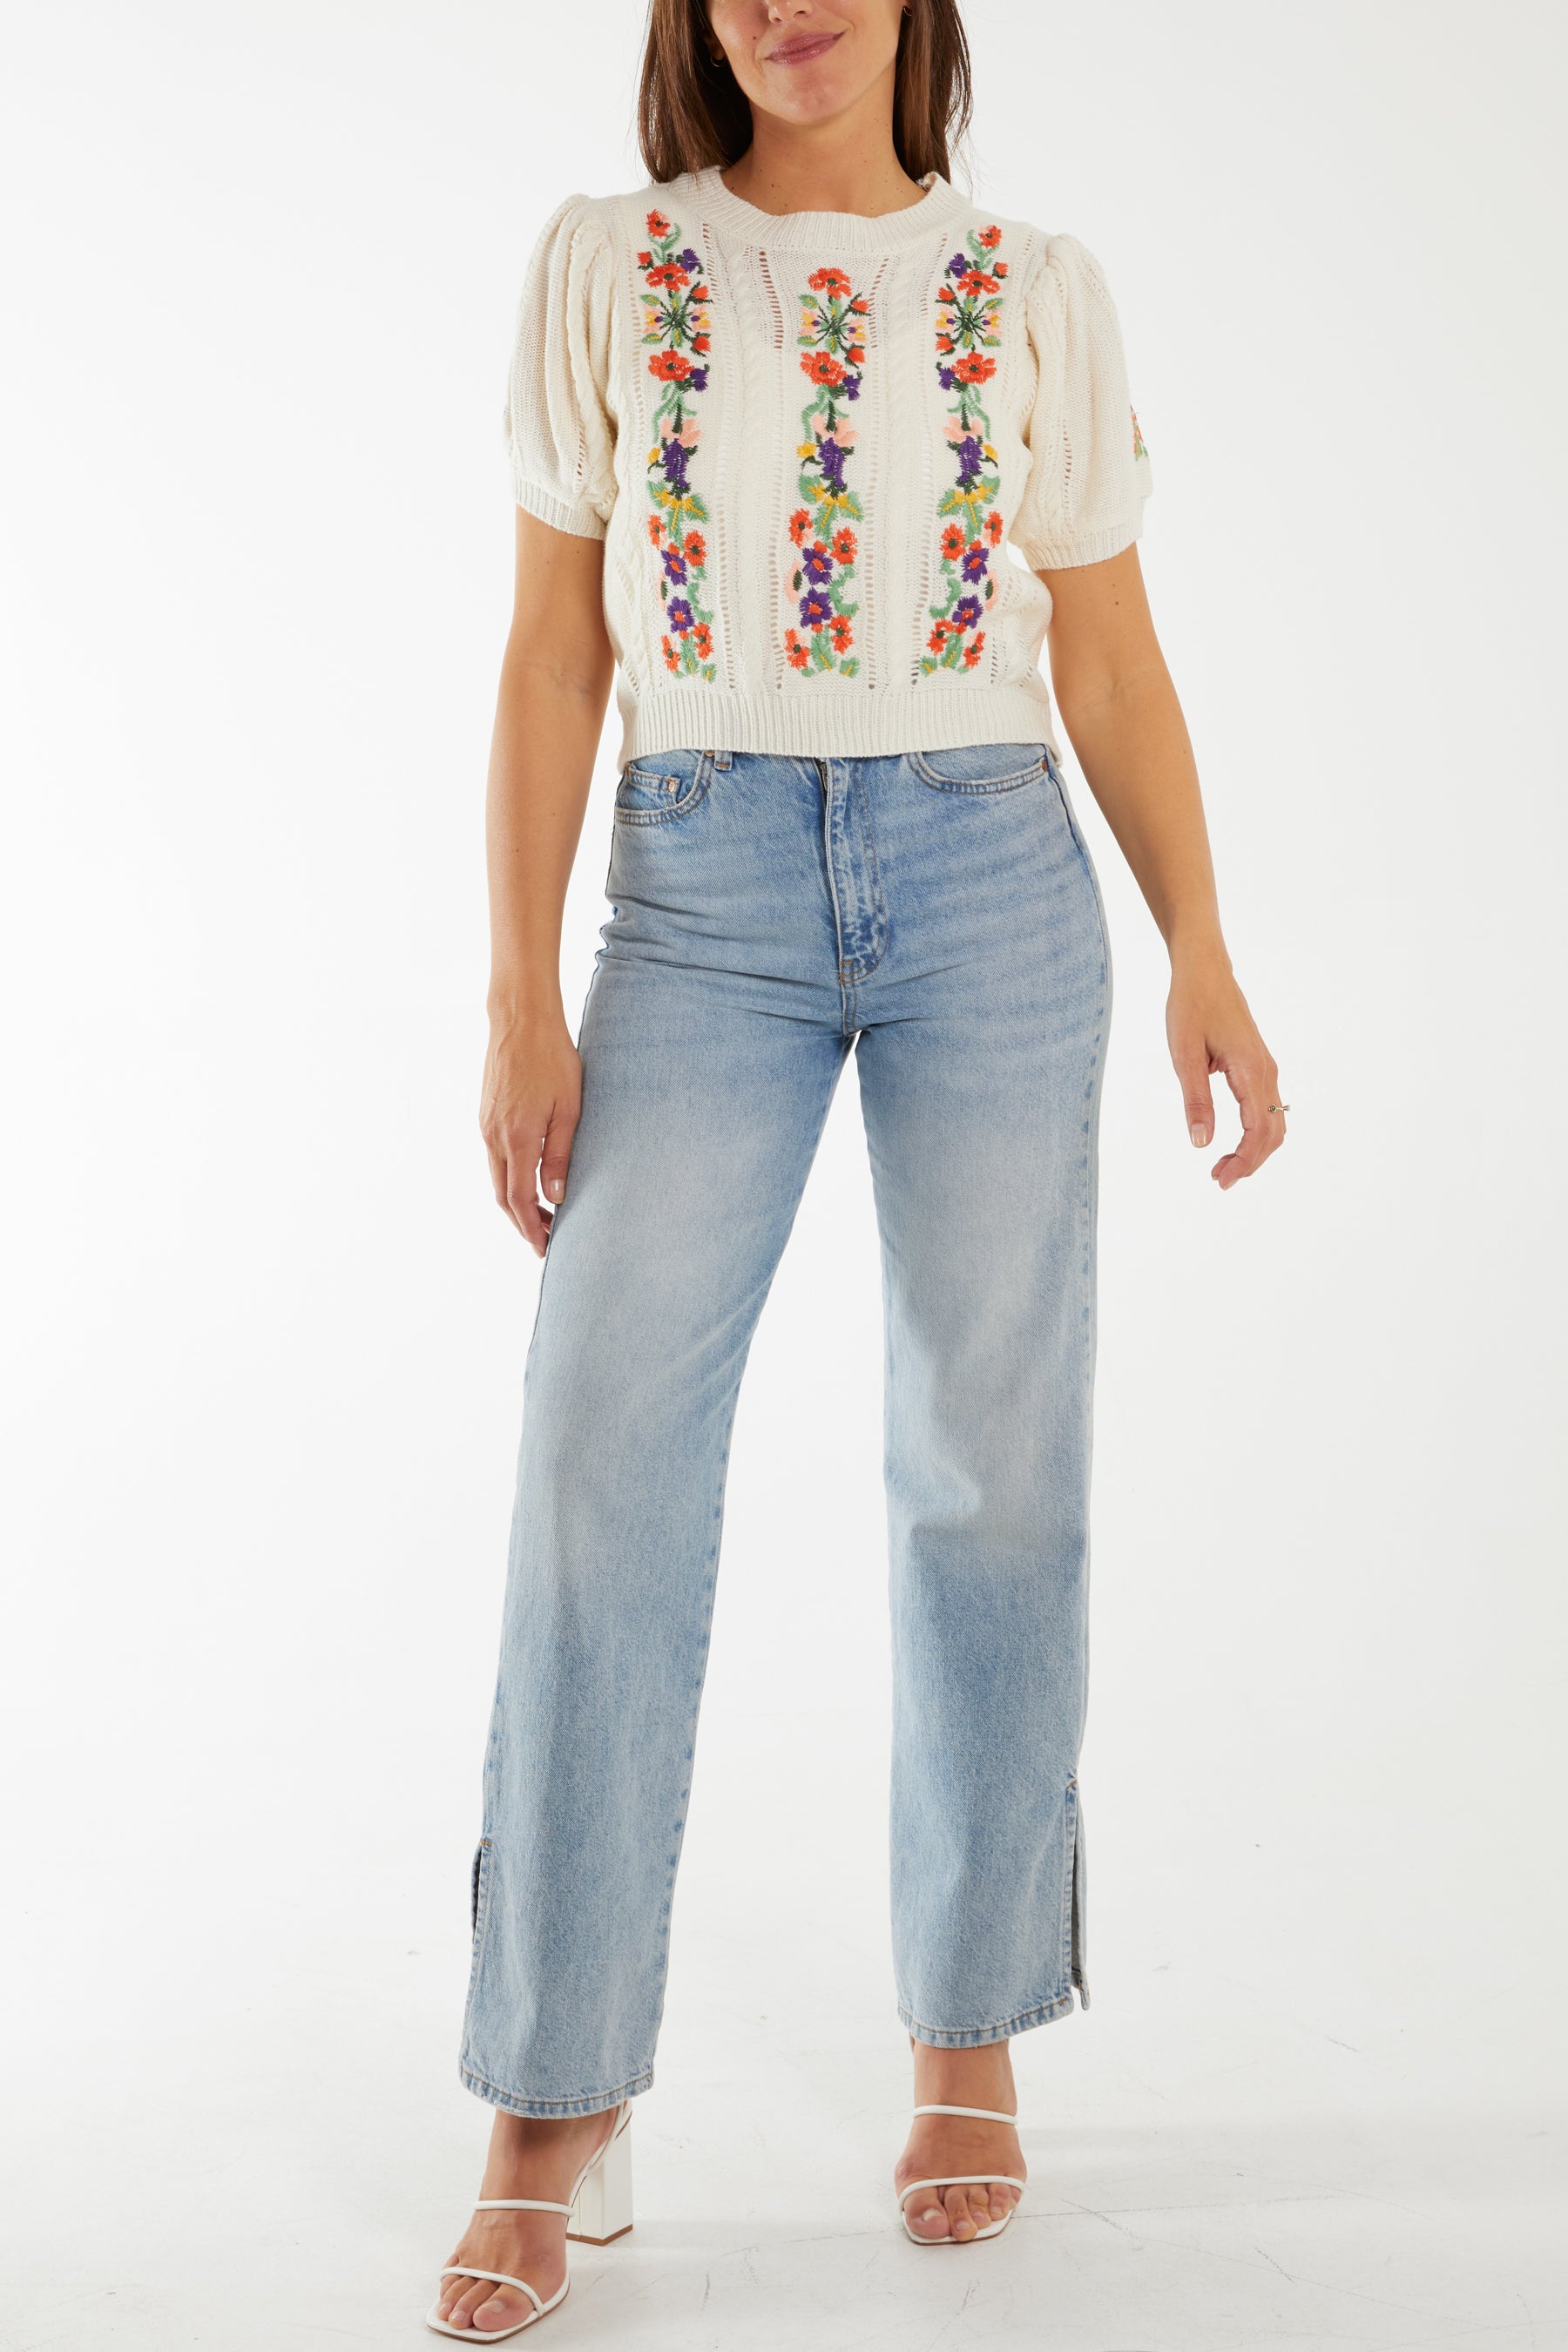 Embroidered Flower Cable Knit Top